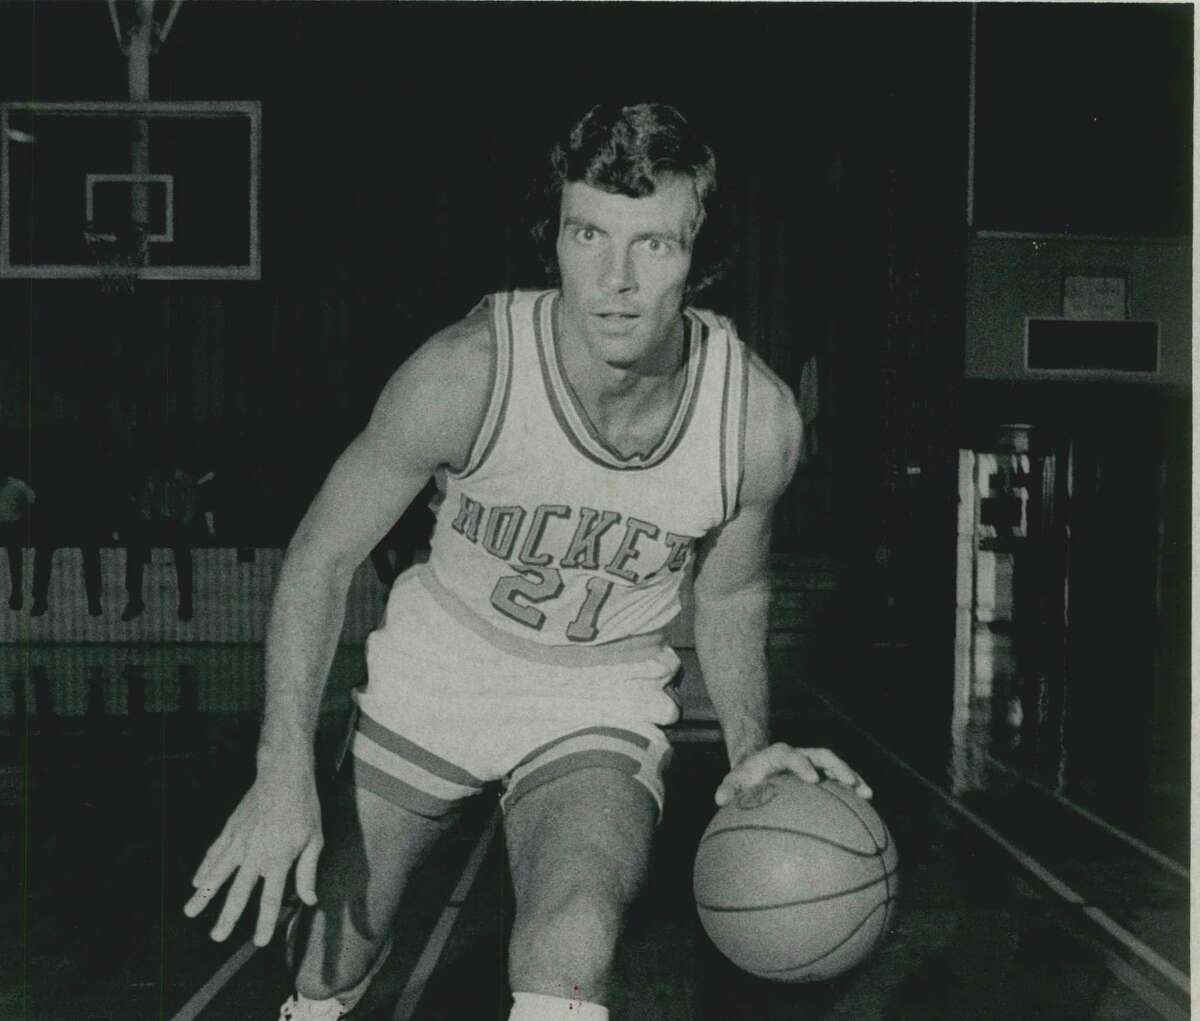 Connecticut high school basketball legend Johnny Egan, one of the state’s most dynamic players in the 1950s, died Thursday in Houston.